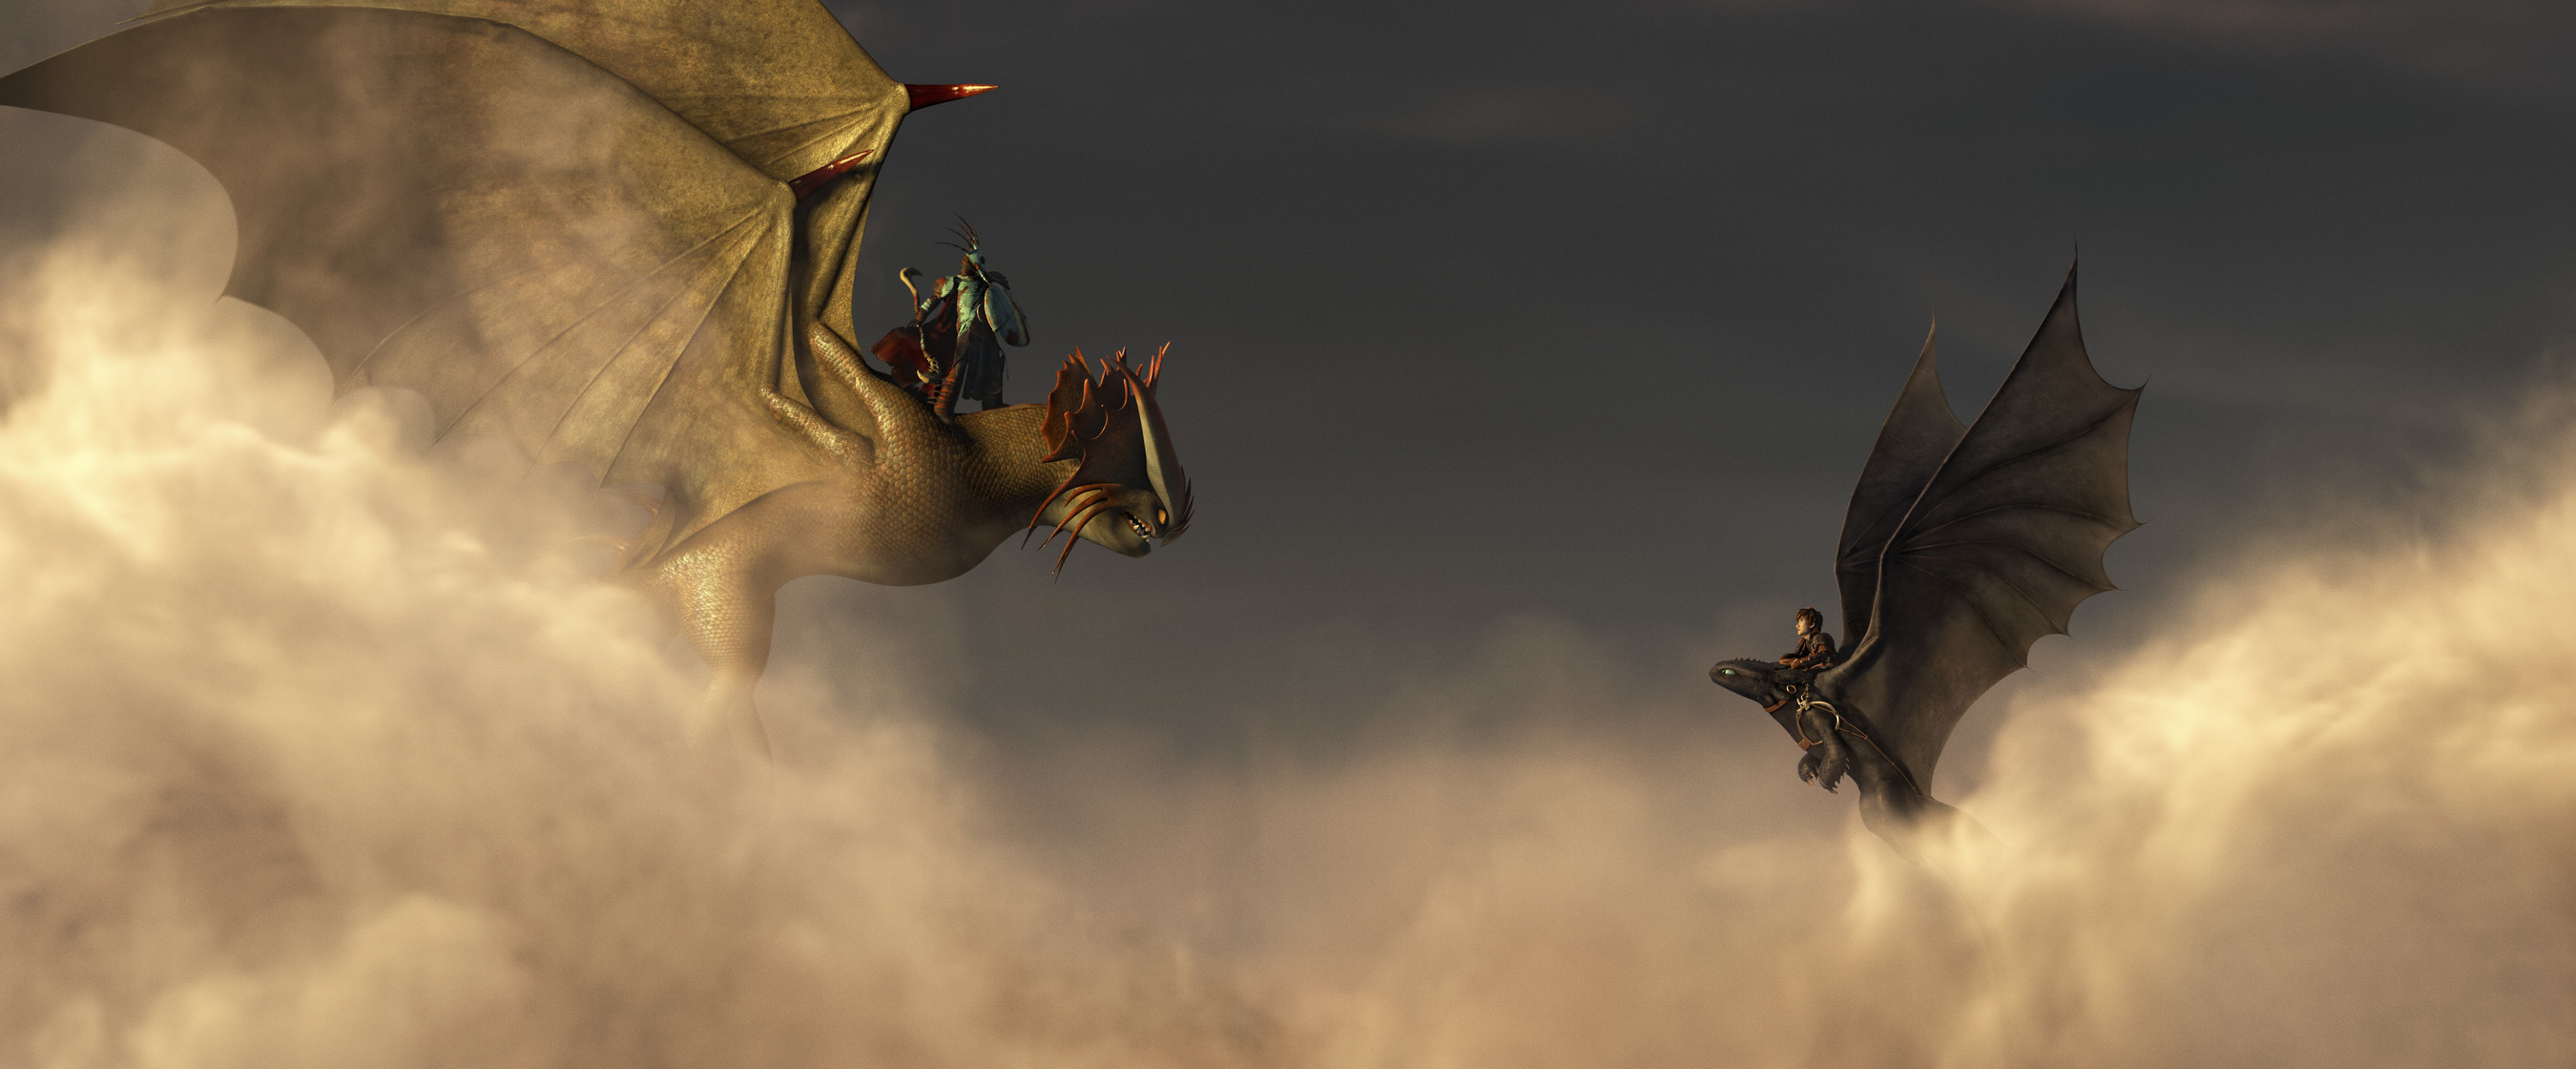 DreamWorks Animation's Sci-Tech award winning OpenVDB was used to help manage the storage of enormous amounts of information created by complex visual effects in Academy Award(R) nominee "How to Train Your Dragon 2." (photo credit: DreamWorks Animation)